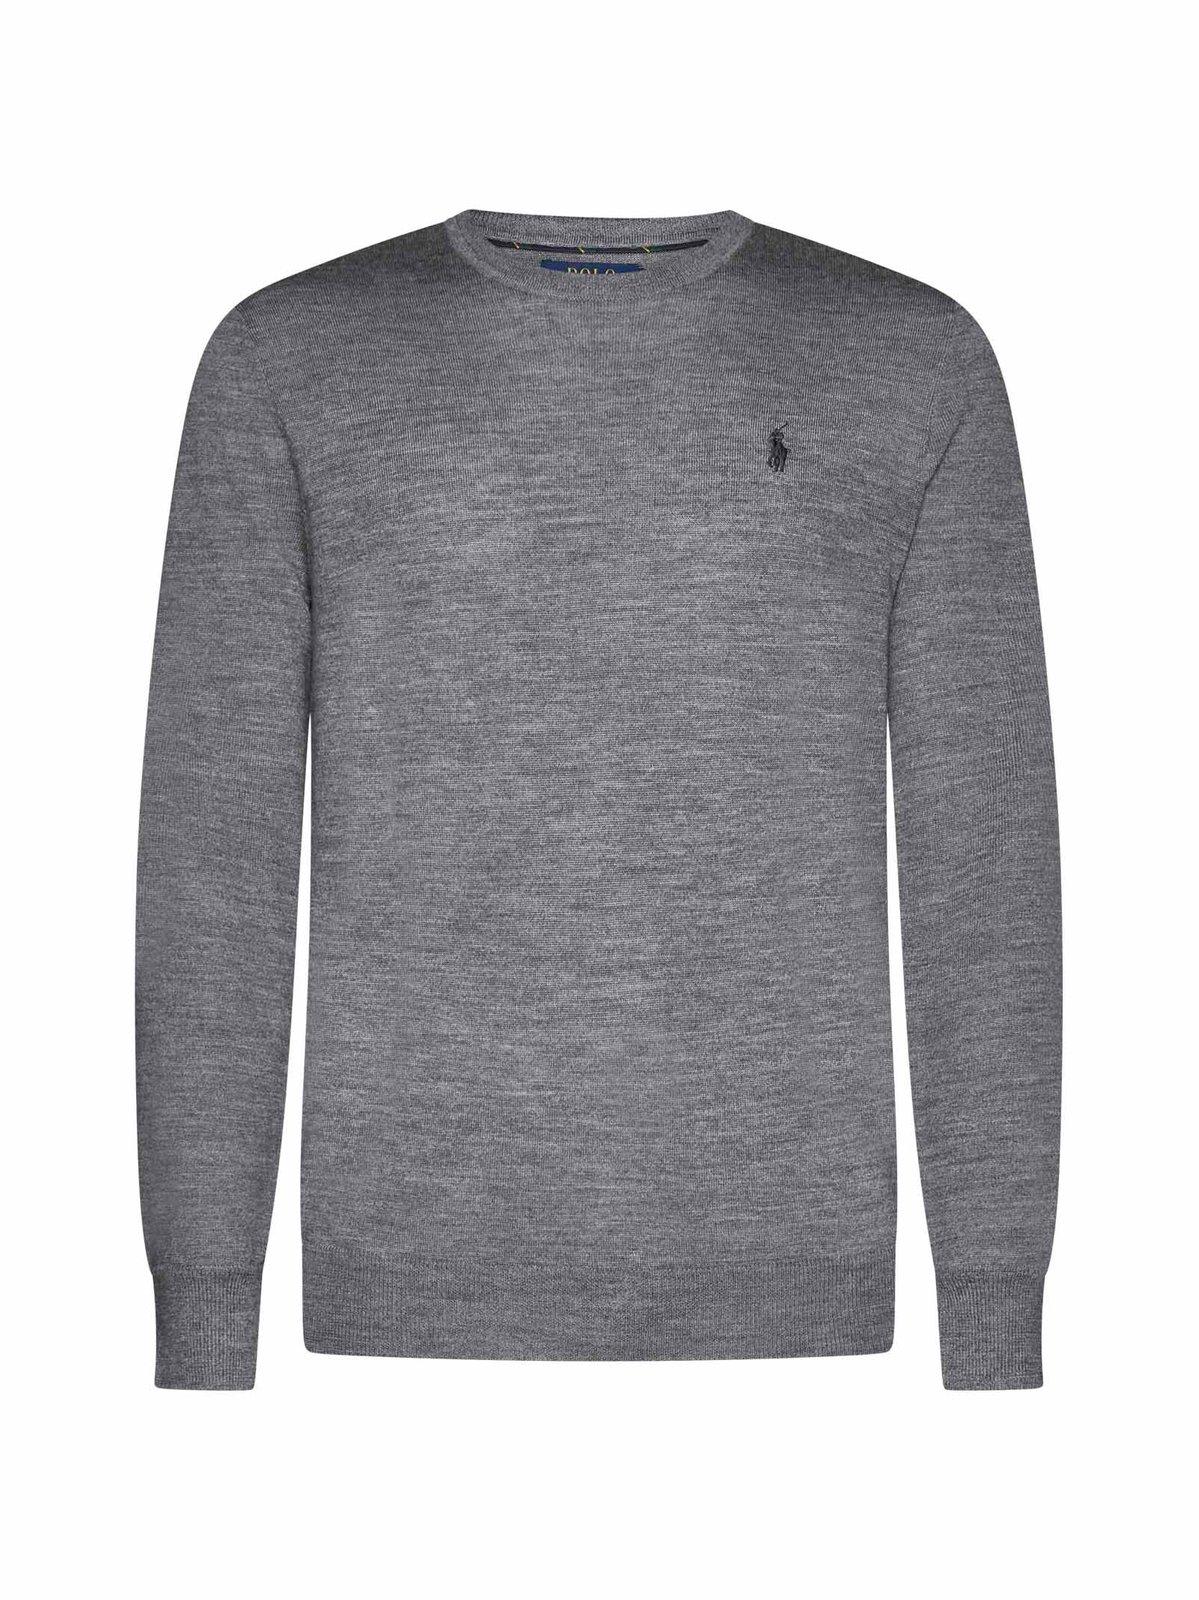 Ralph Lauren Pony Embroidered Knit Jumper In Fawn Grey Heather